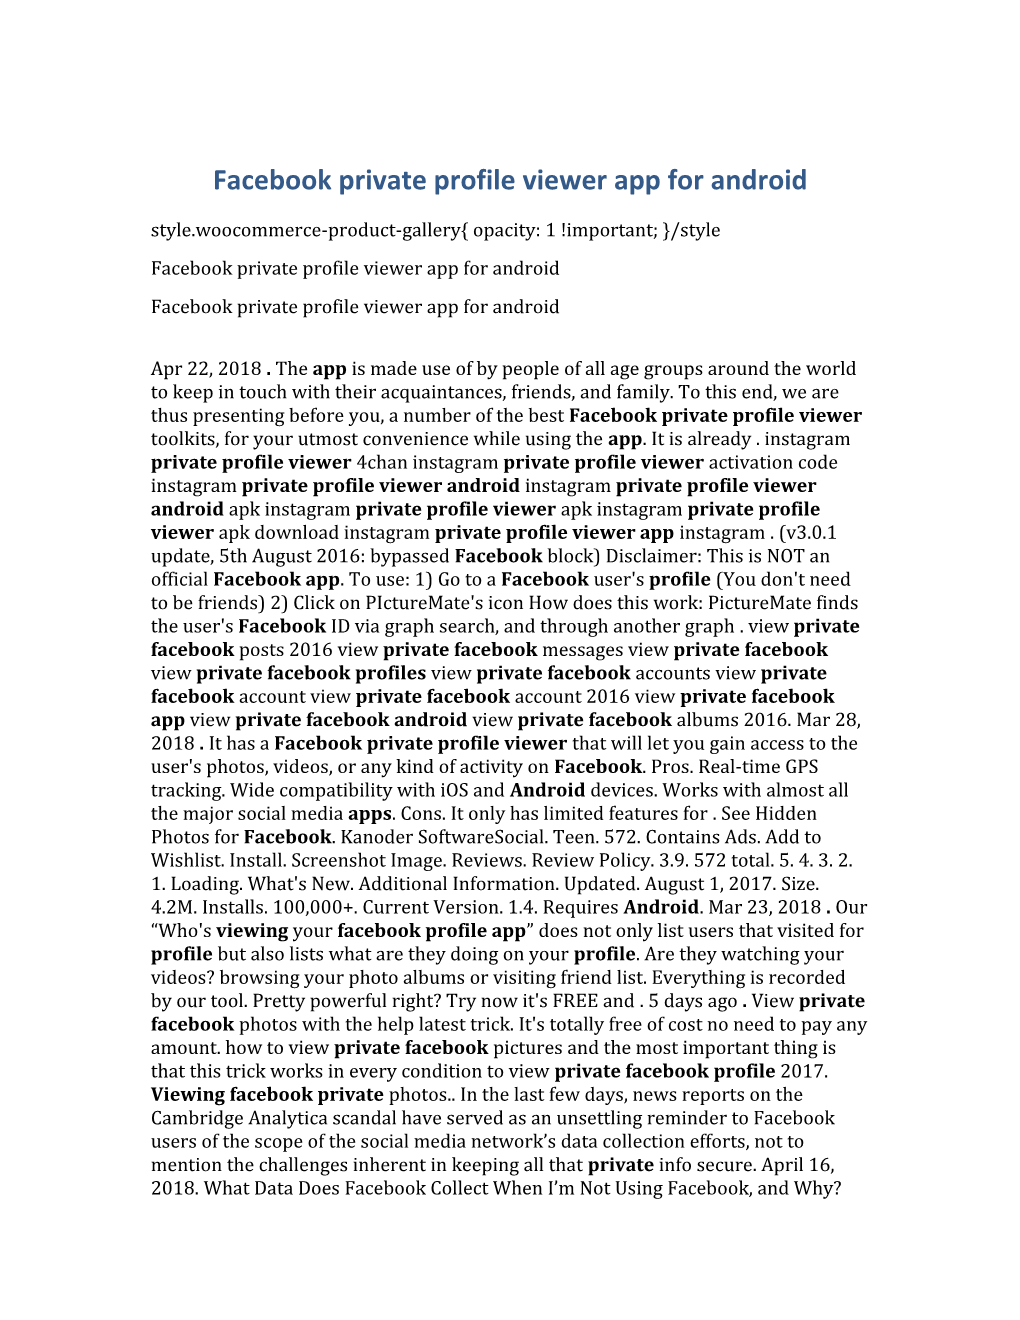 Facebook Private Profile Viewer App for Android